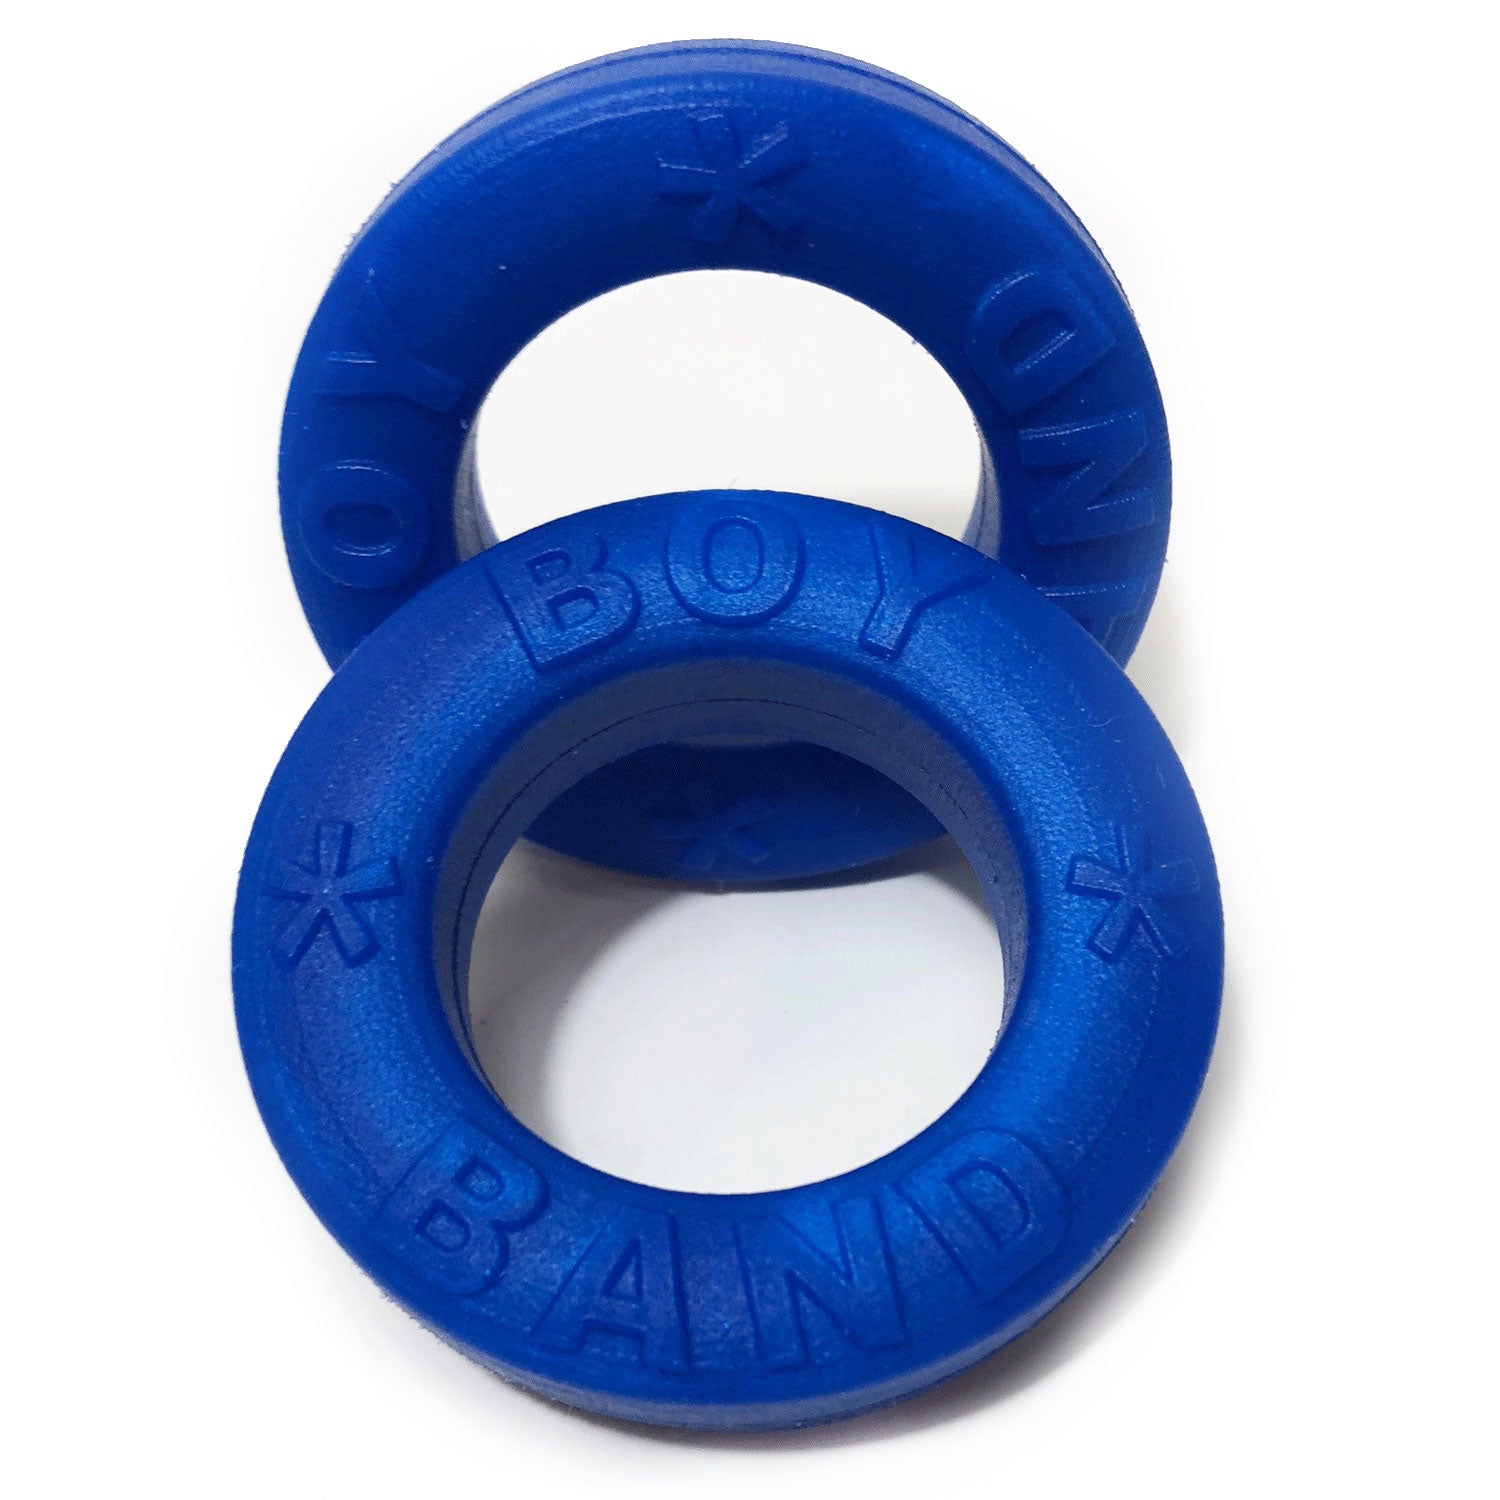 Silicone cock ring -  France